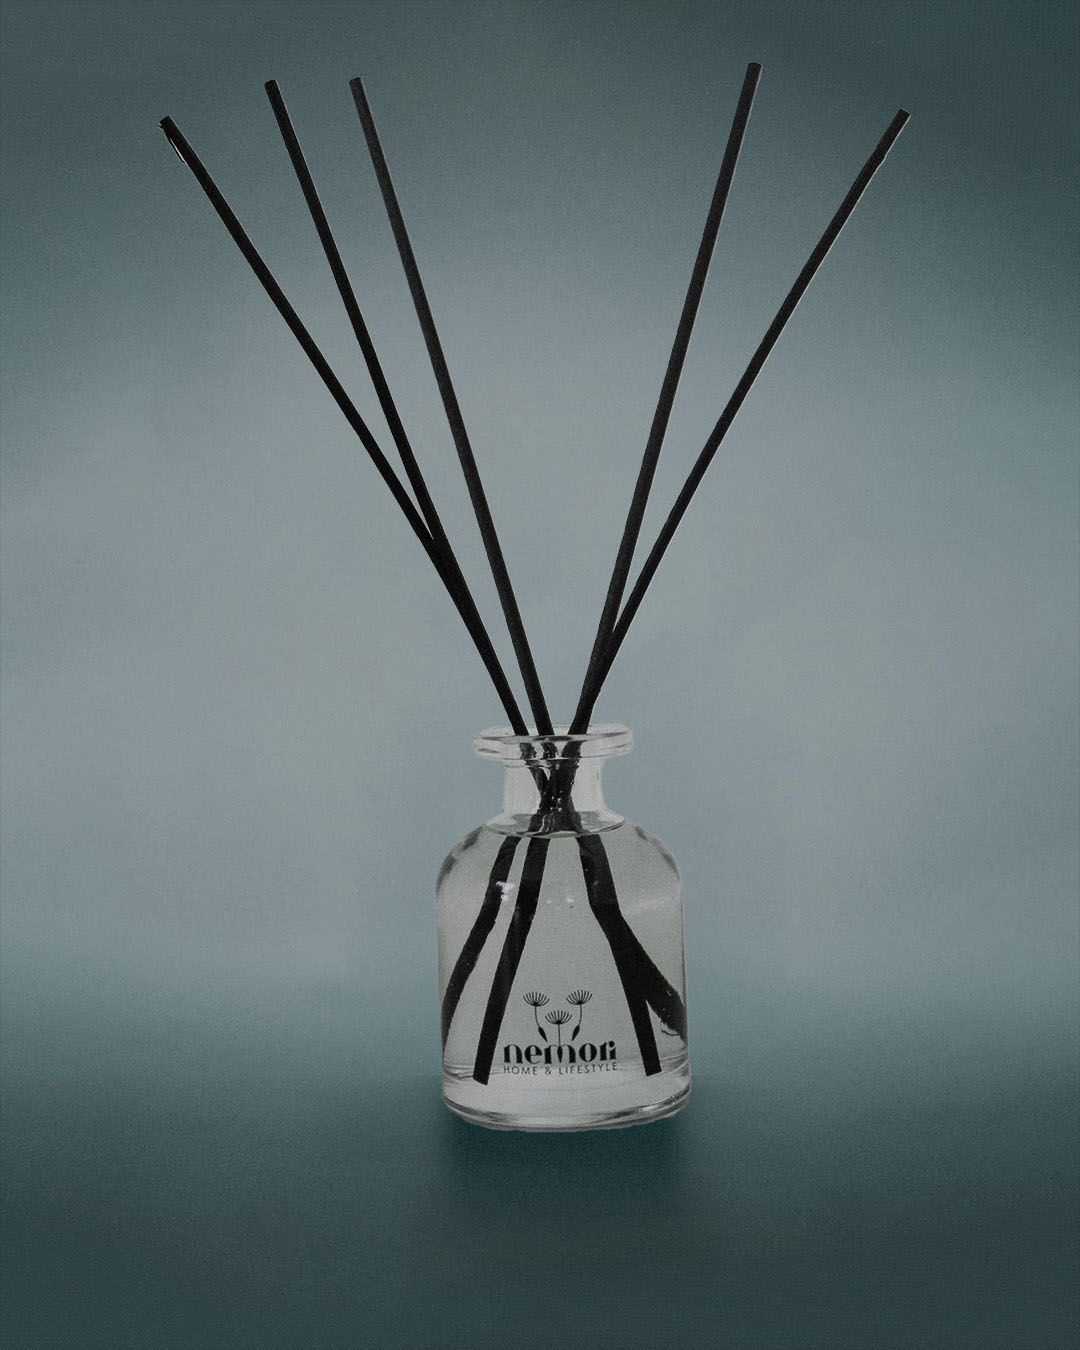 Winter 02  Reed Diffuser 100ml | Sweet Woody Scent